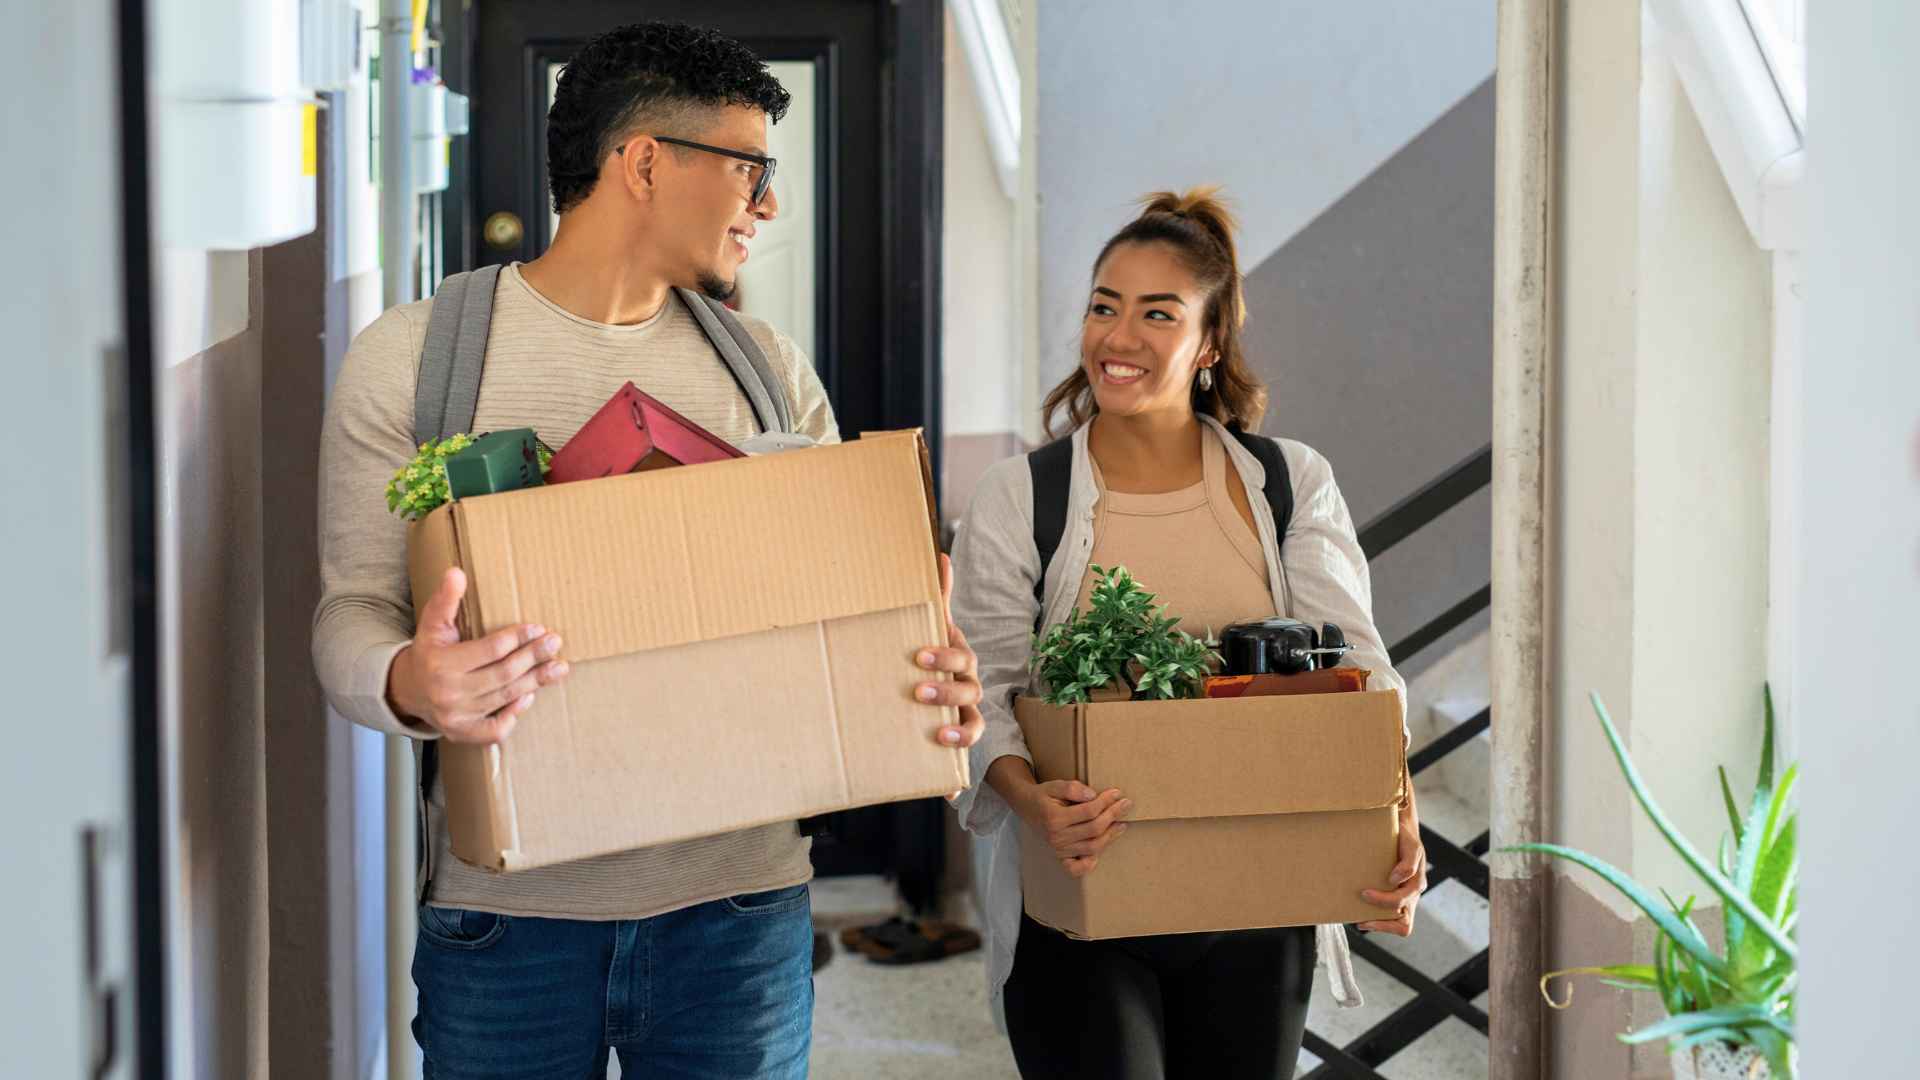 Tips for students: From storage to the question of housing